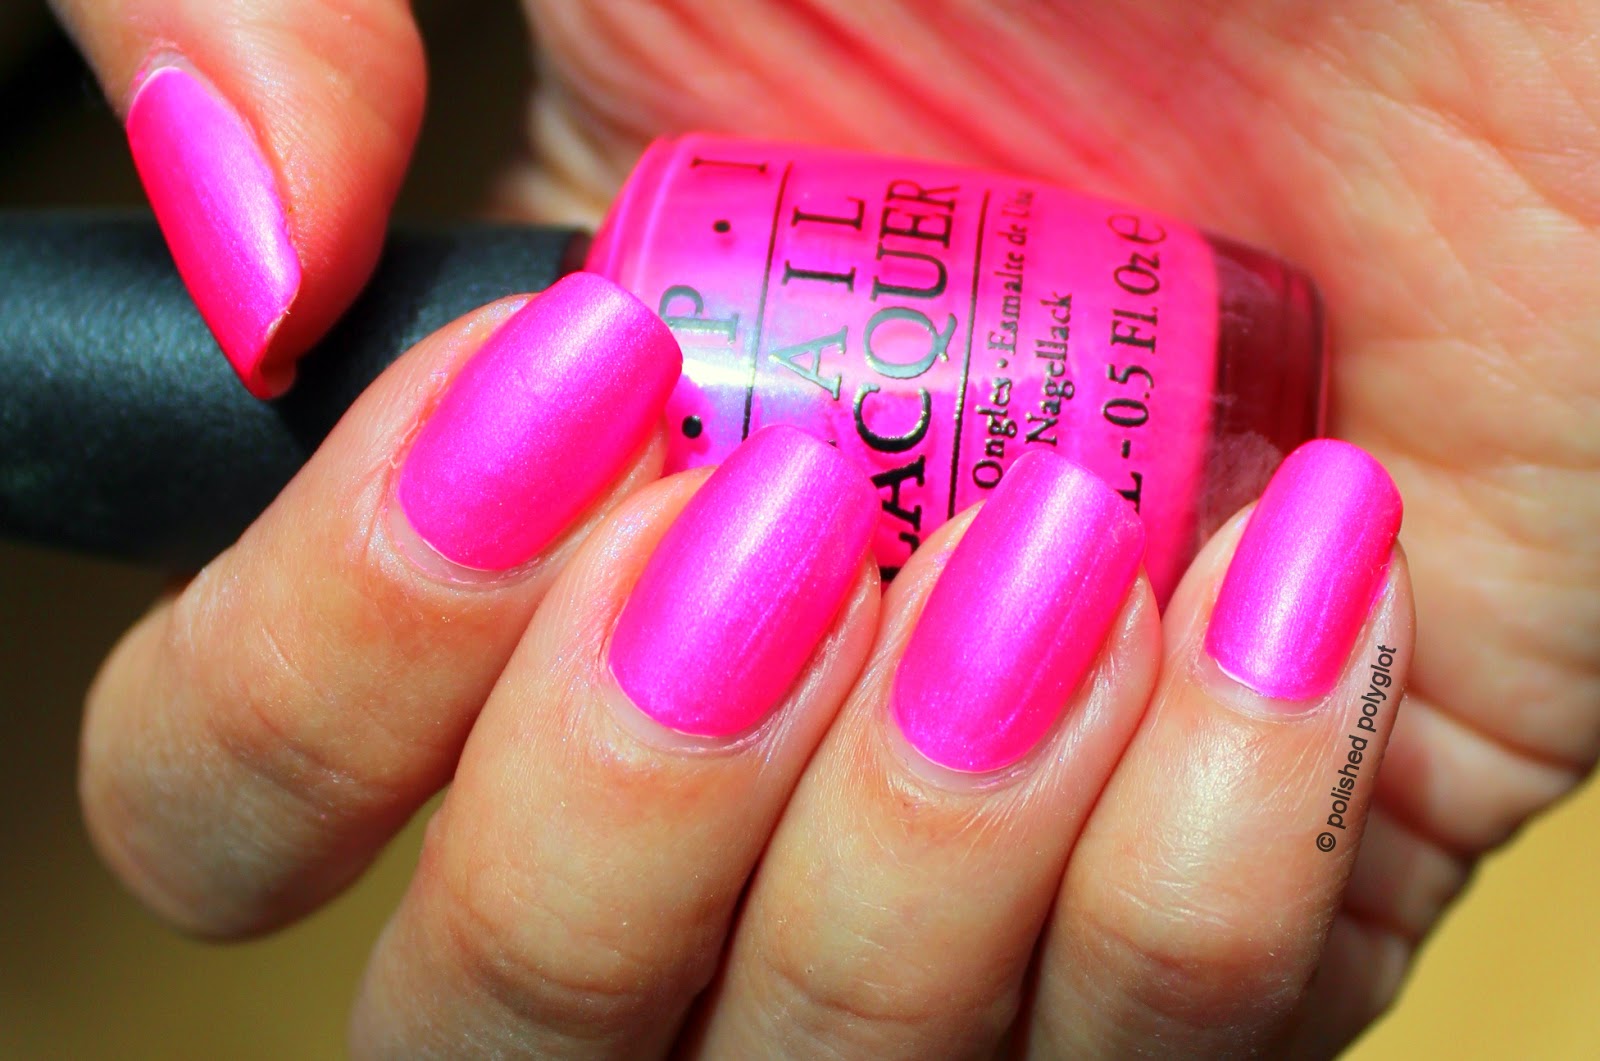 OPI Nail Lacquer in "Hotter Than You Pink" - wide 2